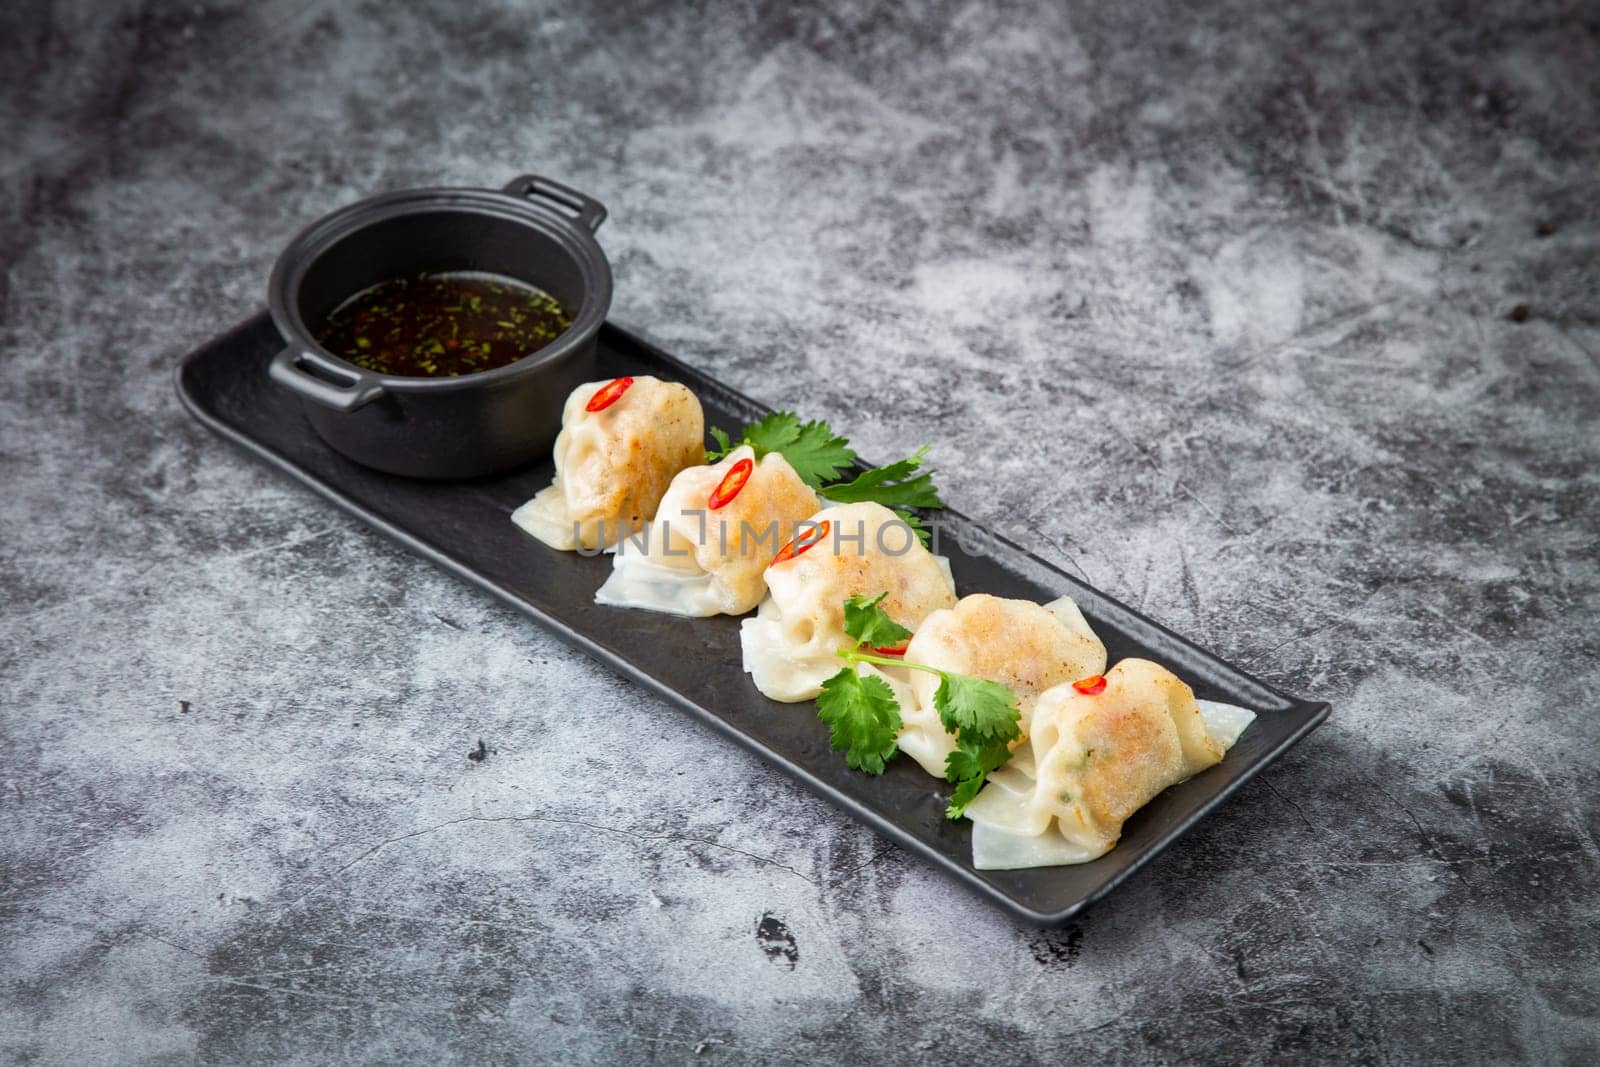 Asian dumplings with soy sauce, chili peppers and herbs